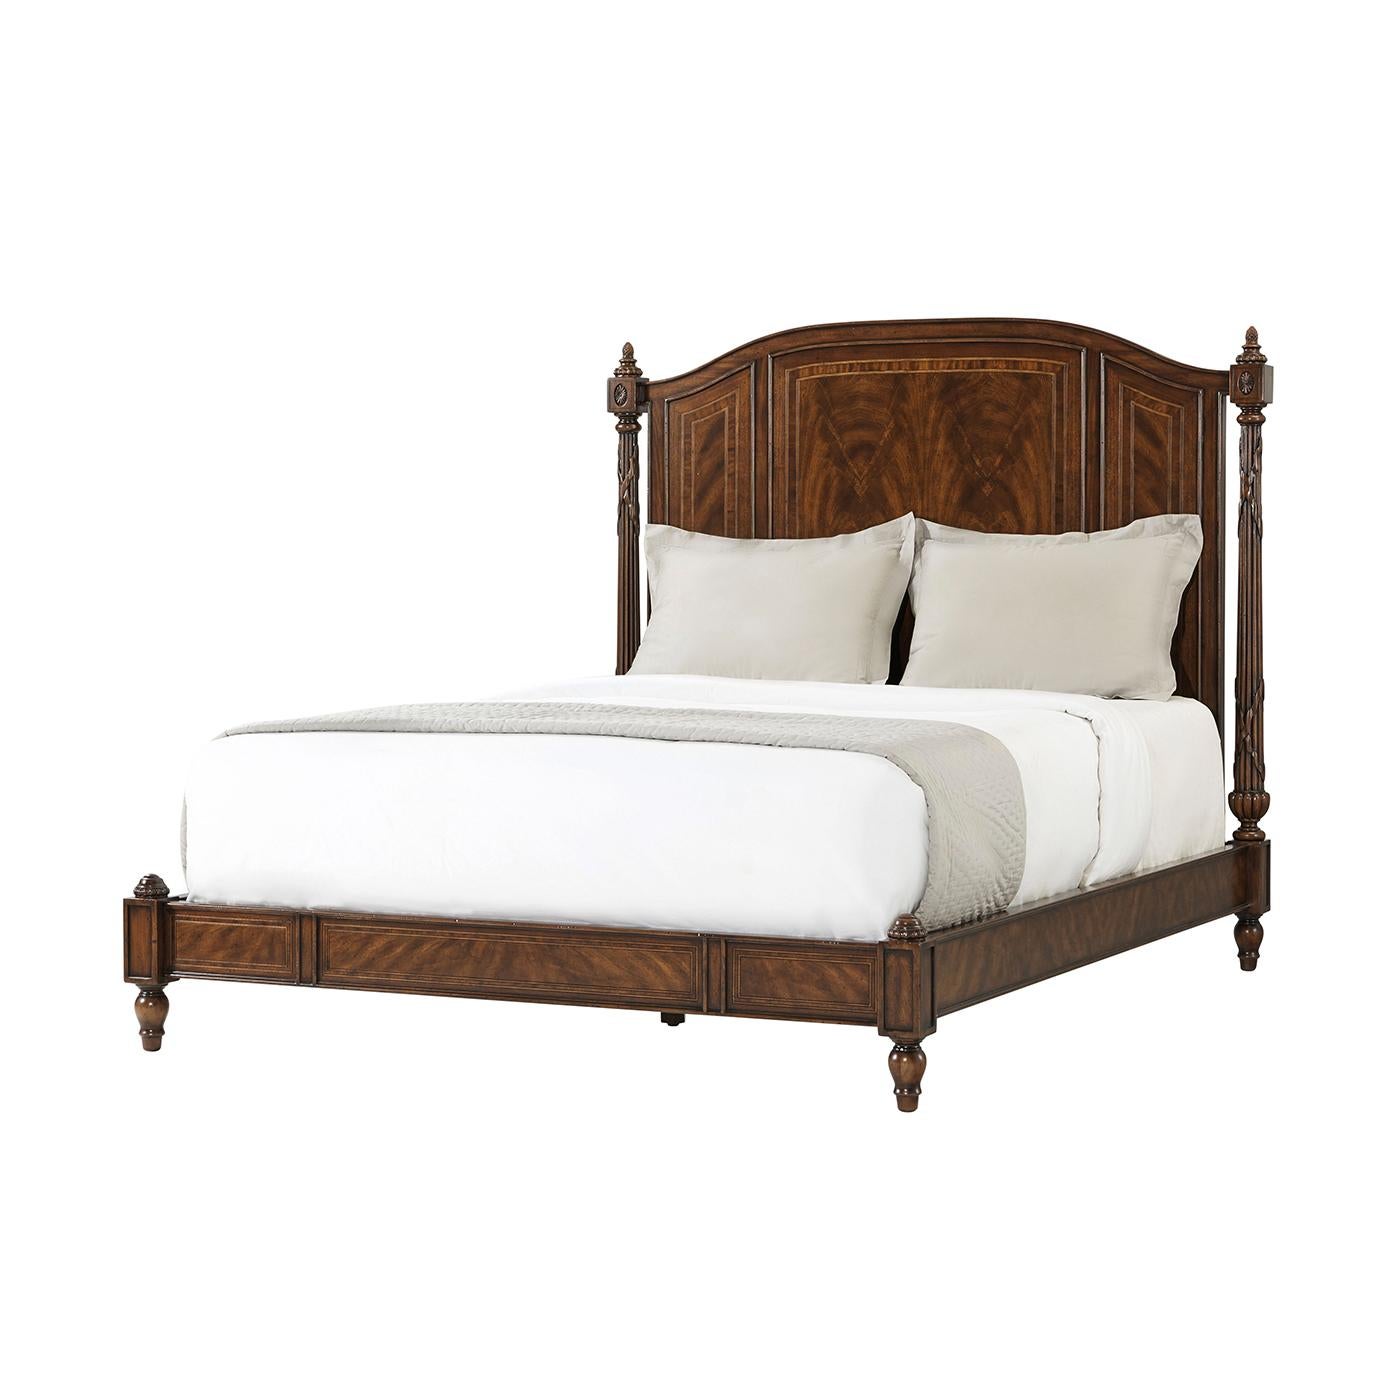 Classical Polished Queen Size Bed For Sale